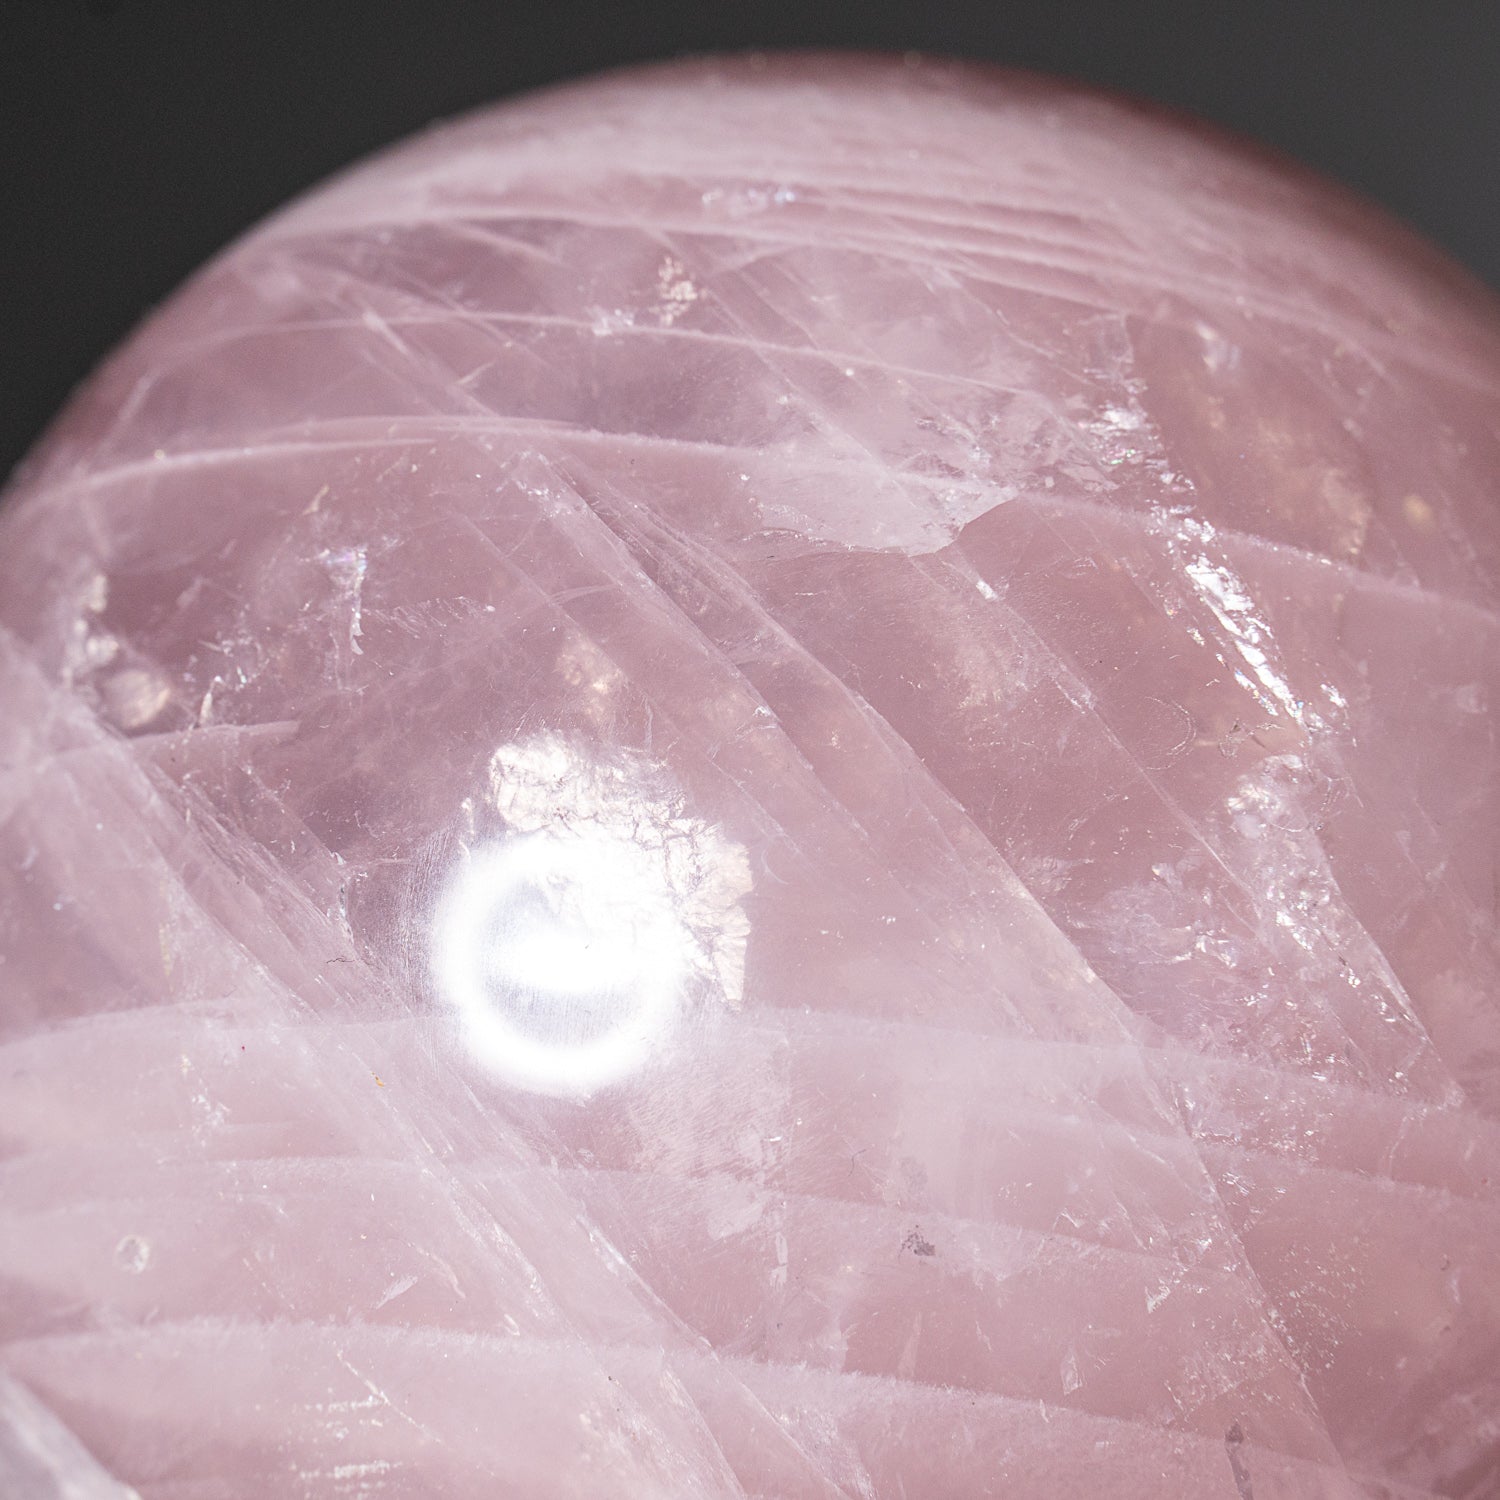 Polished Rose Quartz Sphere from Madagascar (2.2 lbs)